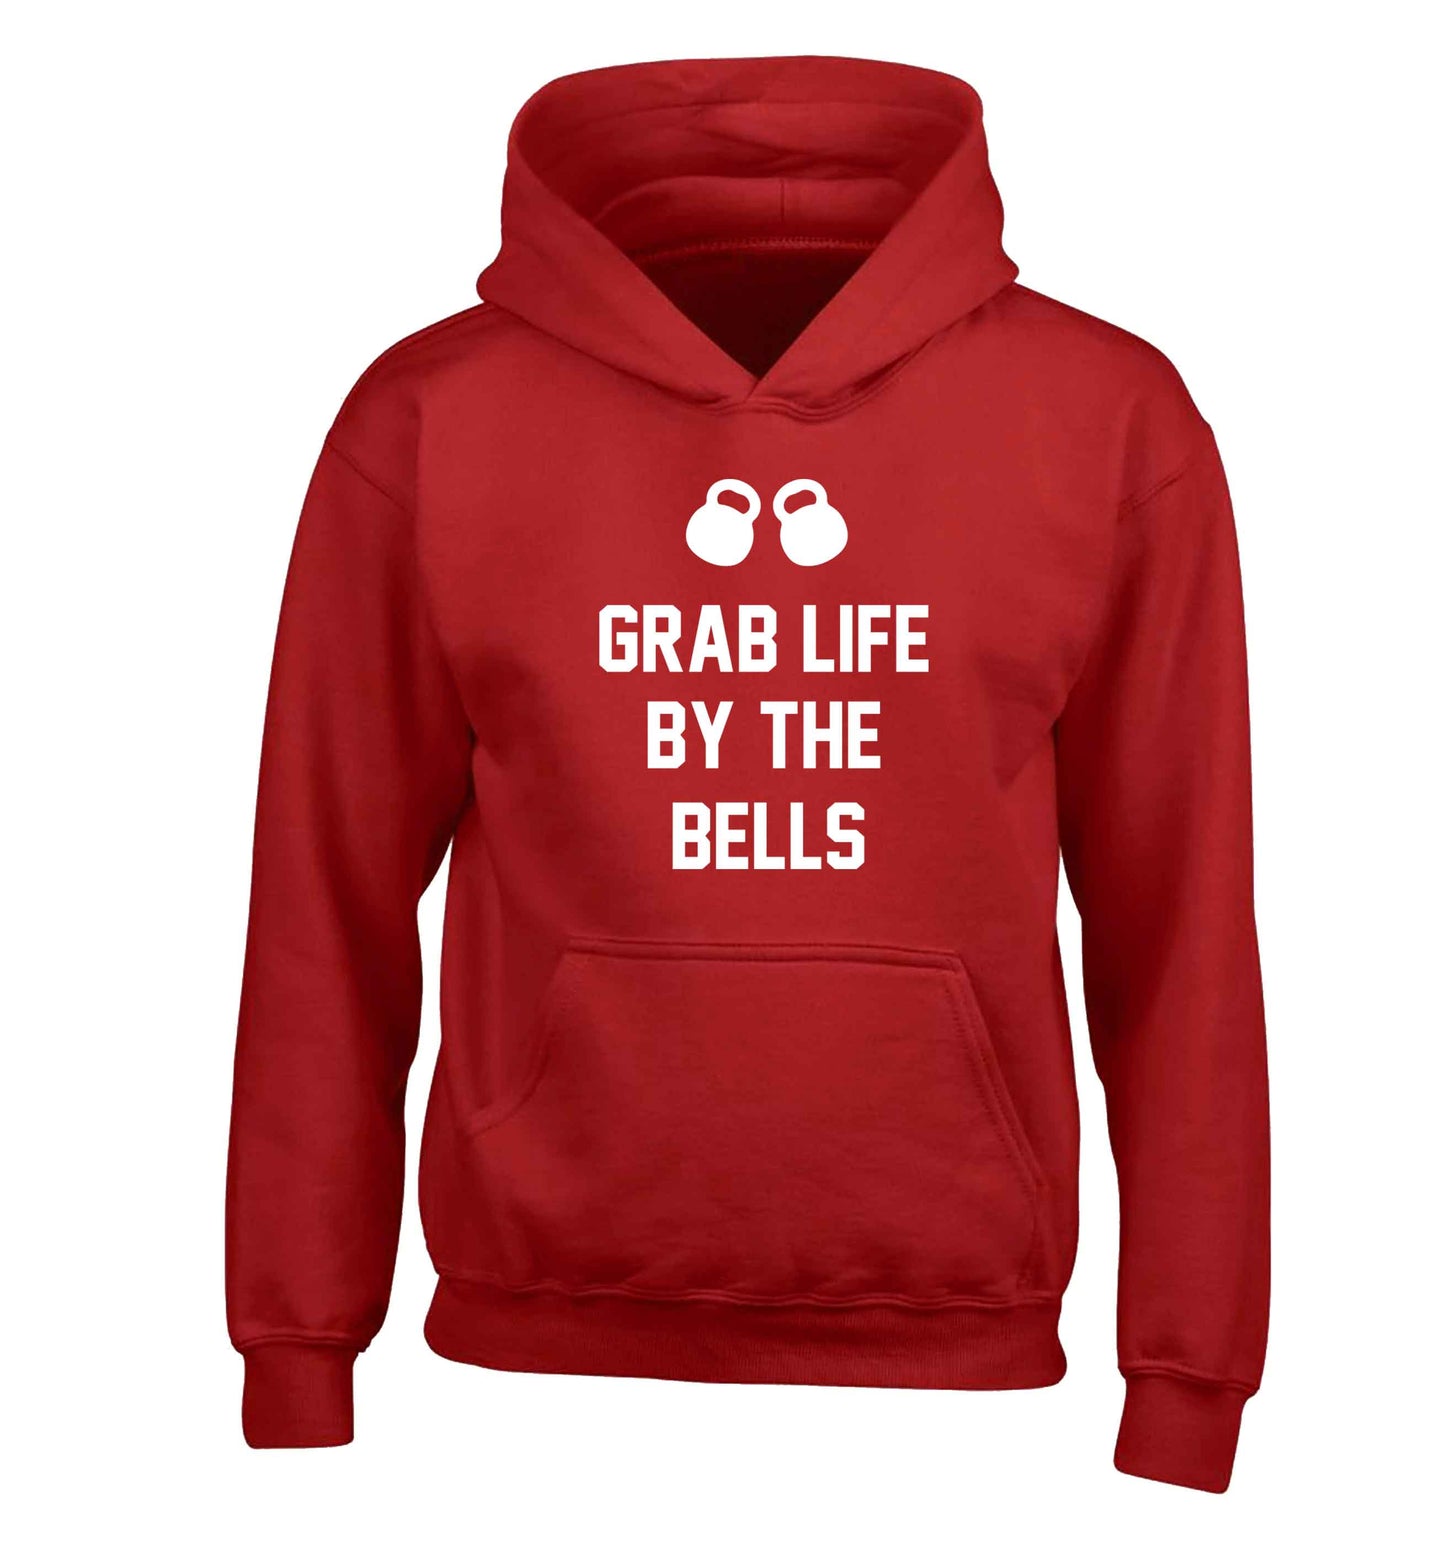 Grab life by the bells children's red hoodie 12-13 Years